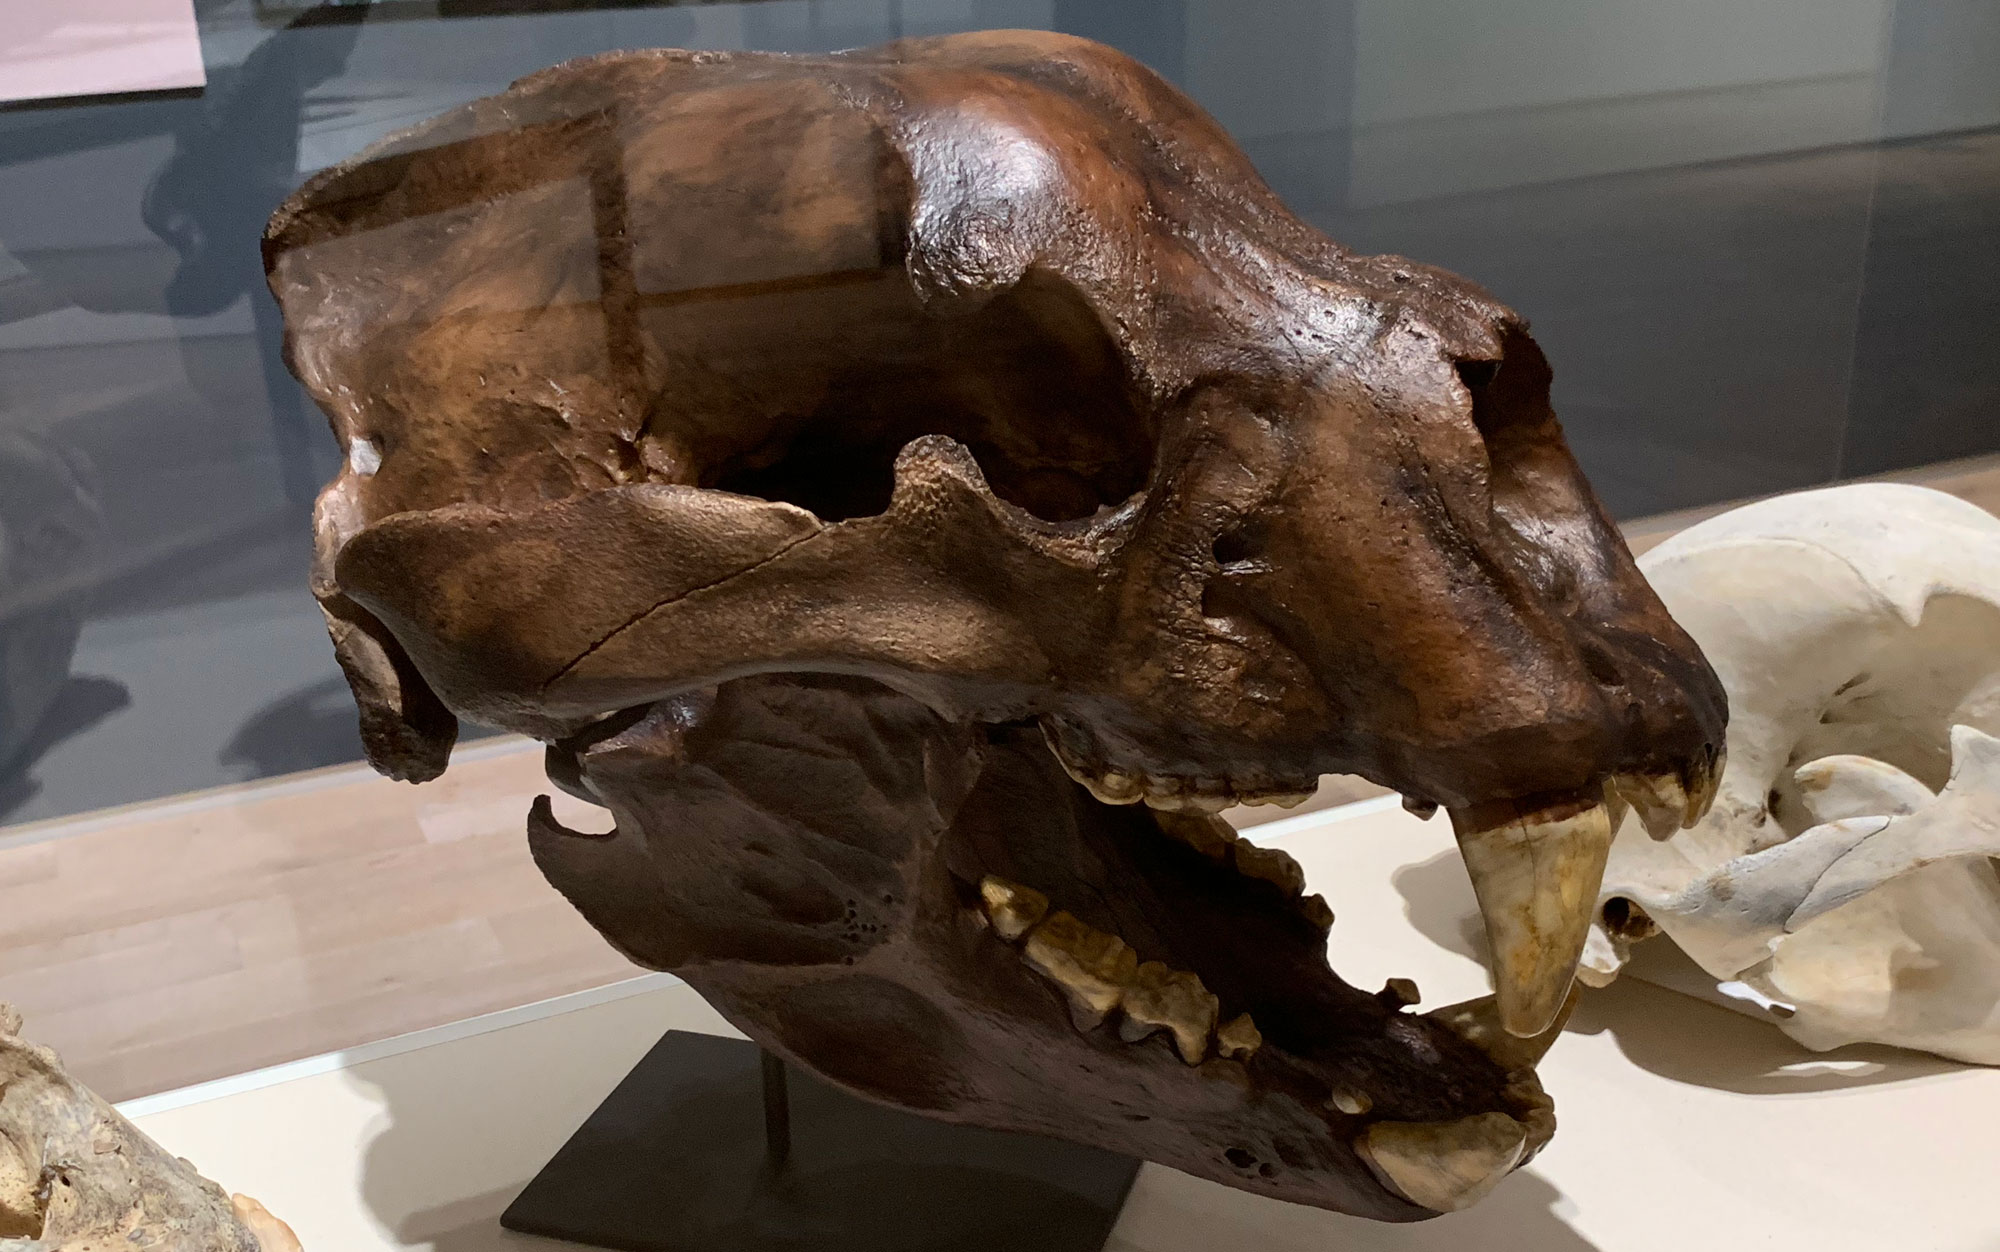 Photograph of the skull of a short-faced bear from the Pleistocene of Alaska in a display case. The skull is robust with a short snout and large canine teeth.